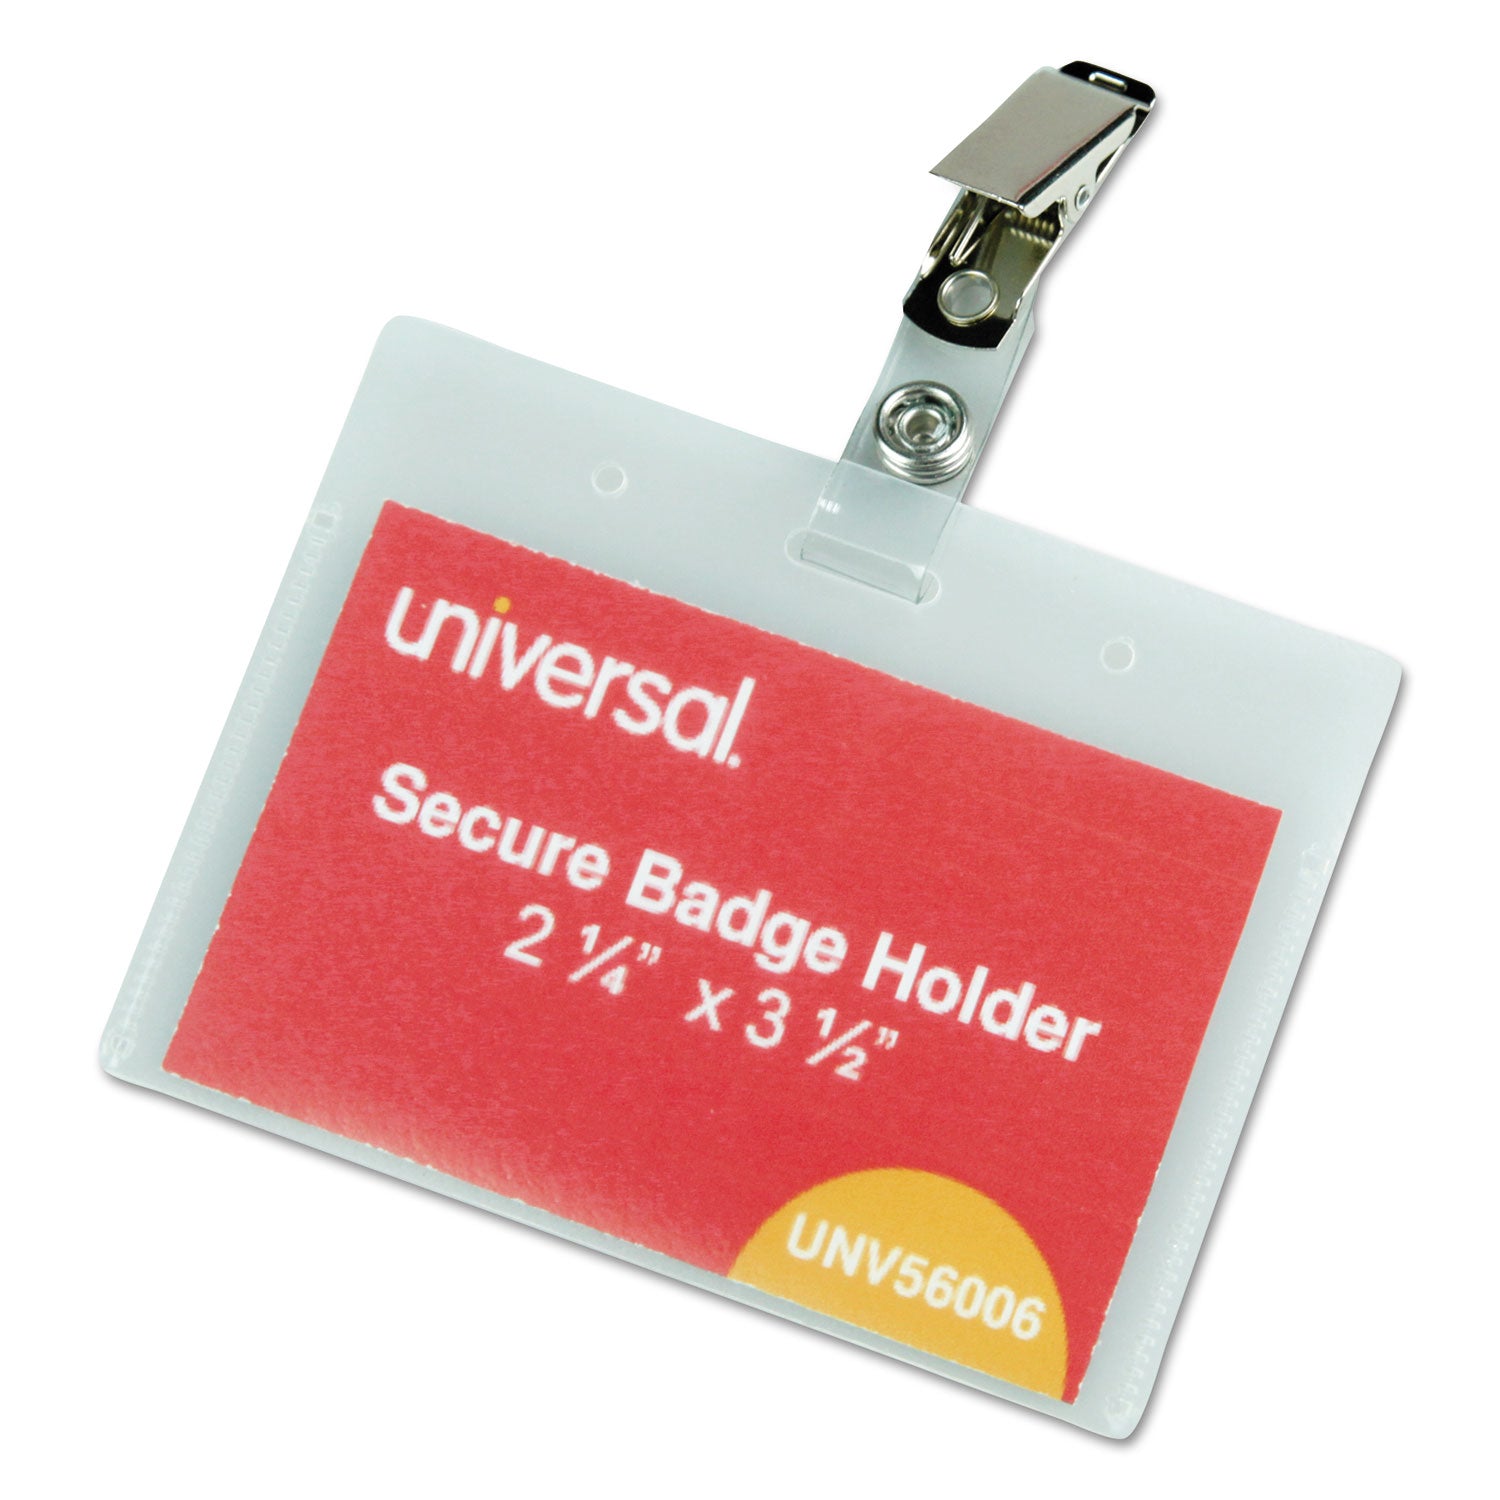 deluxe-clear-badge-holder-w-garment-safe-clips-225-x-35-white-insert-50-box_unv56006 - 1